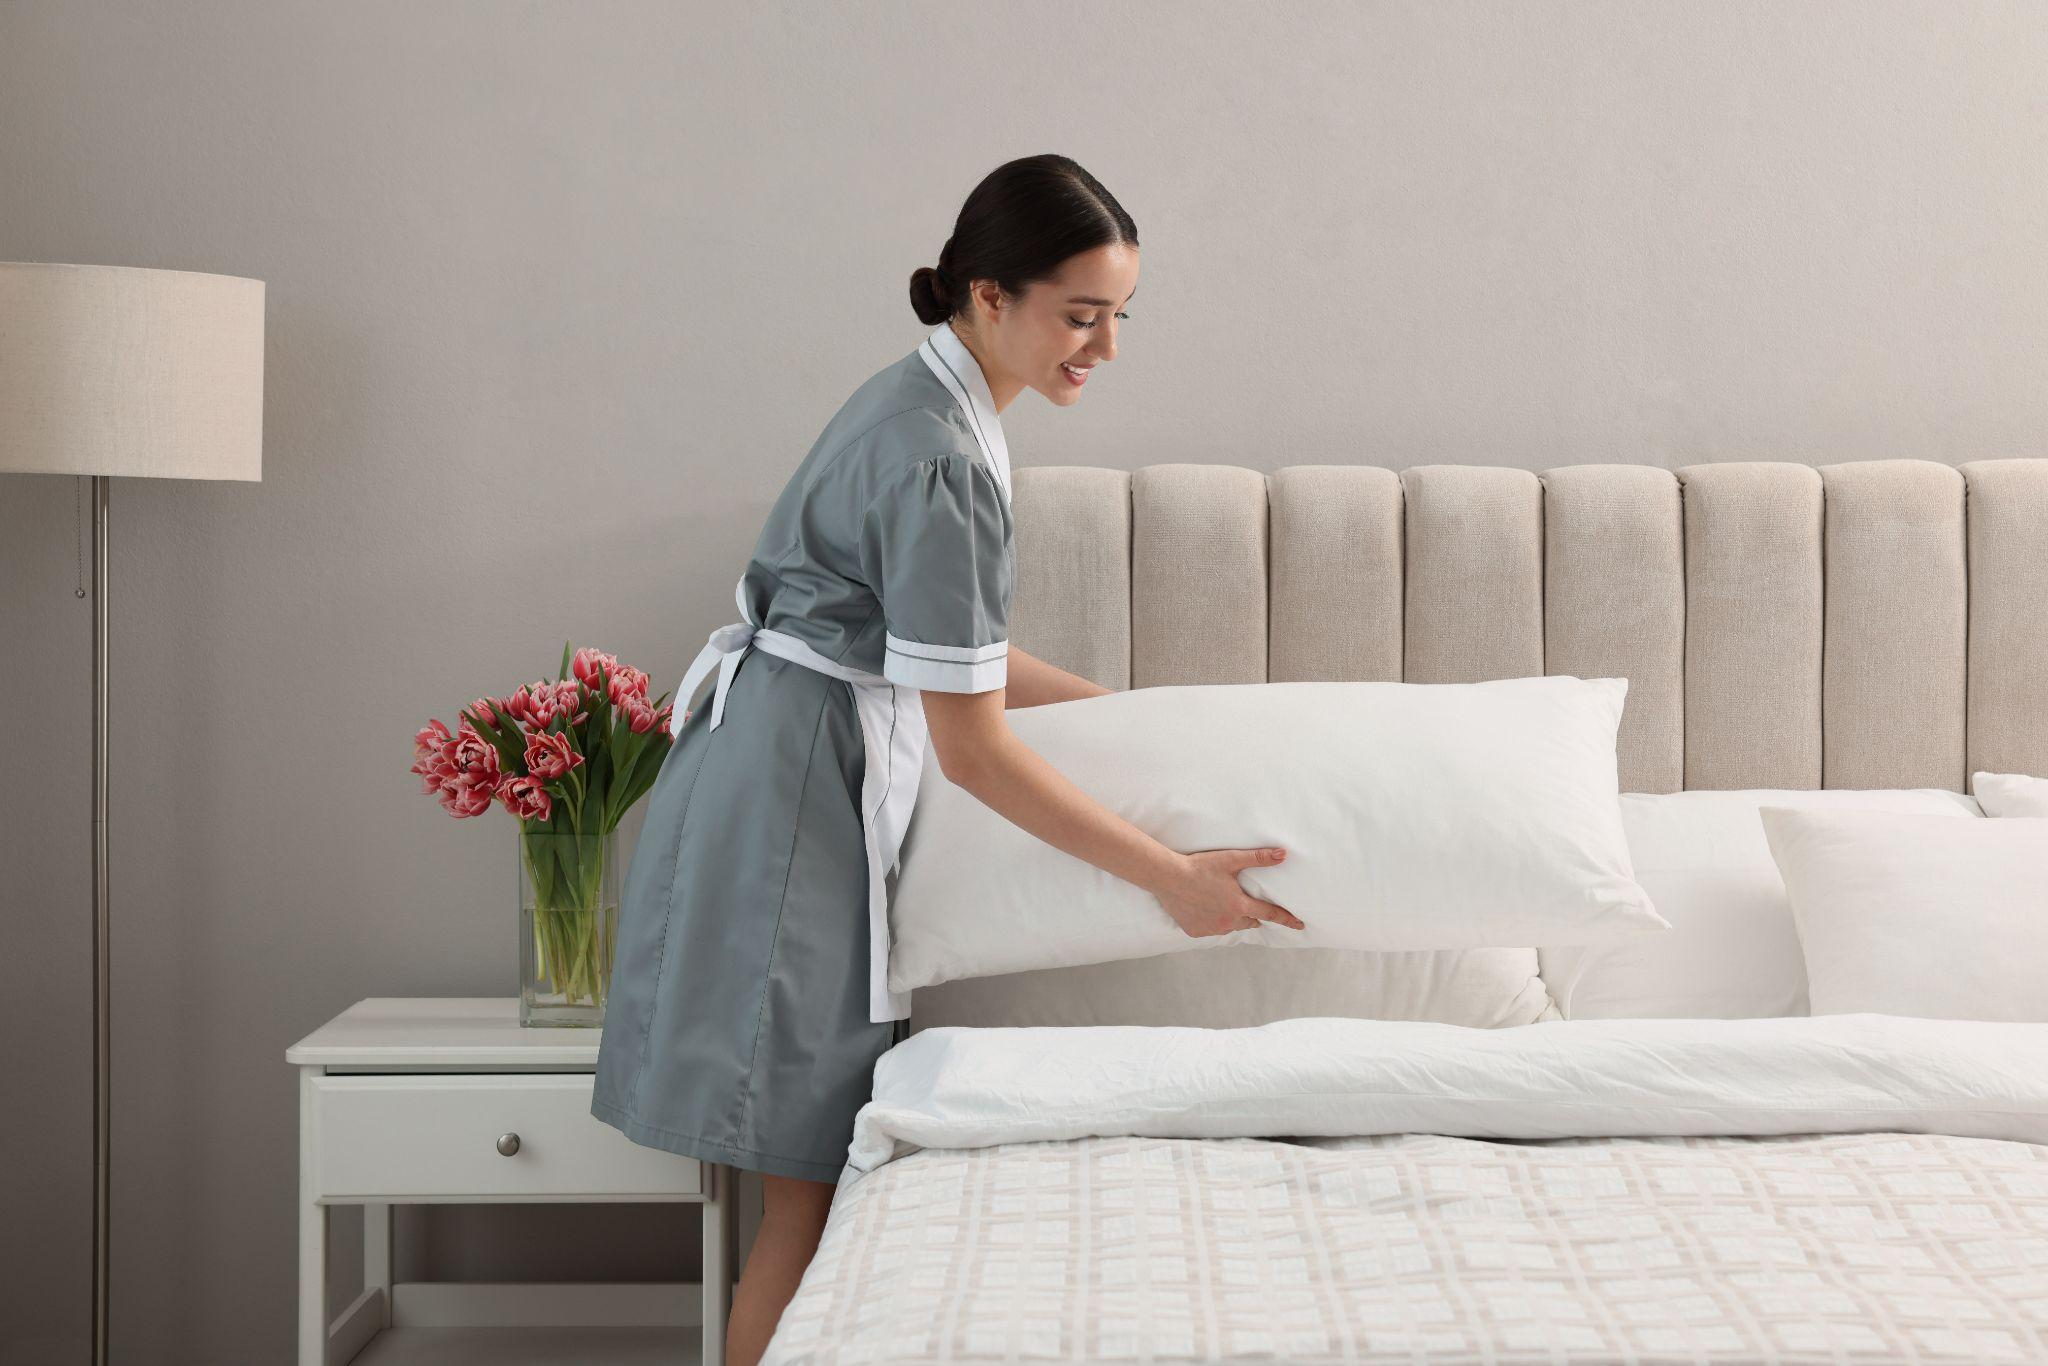 Professional chambermaid making bed in room